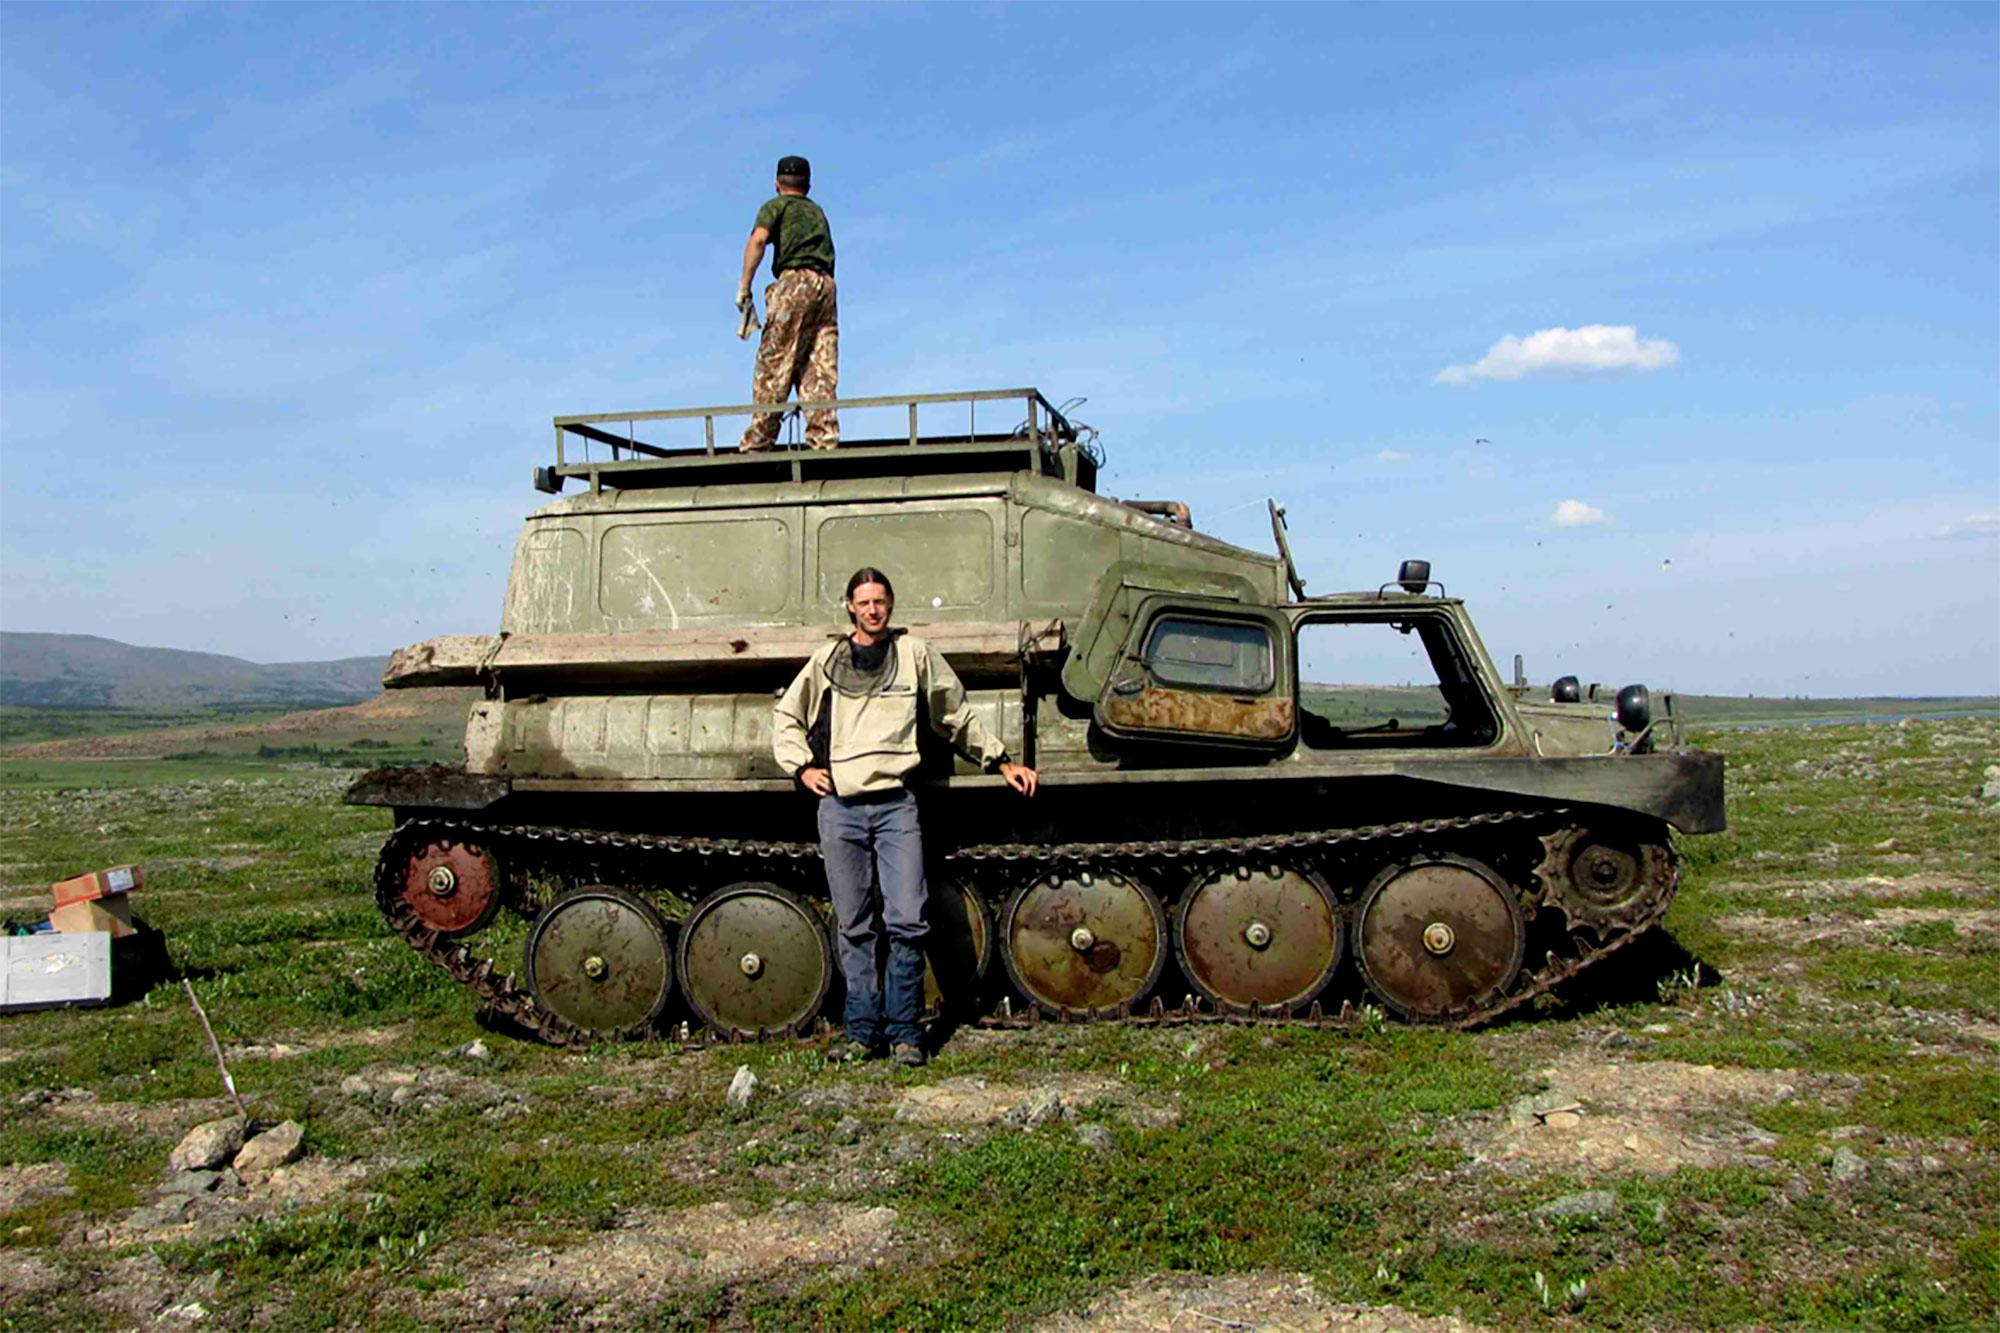 Researcher Gerald Frost stands before an old Russian armored vehicle he and Epstein used to study remote areas of Arctic tundra.